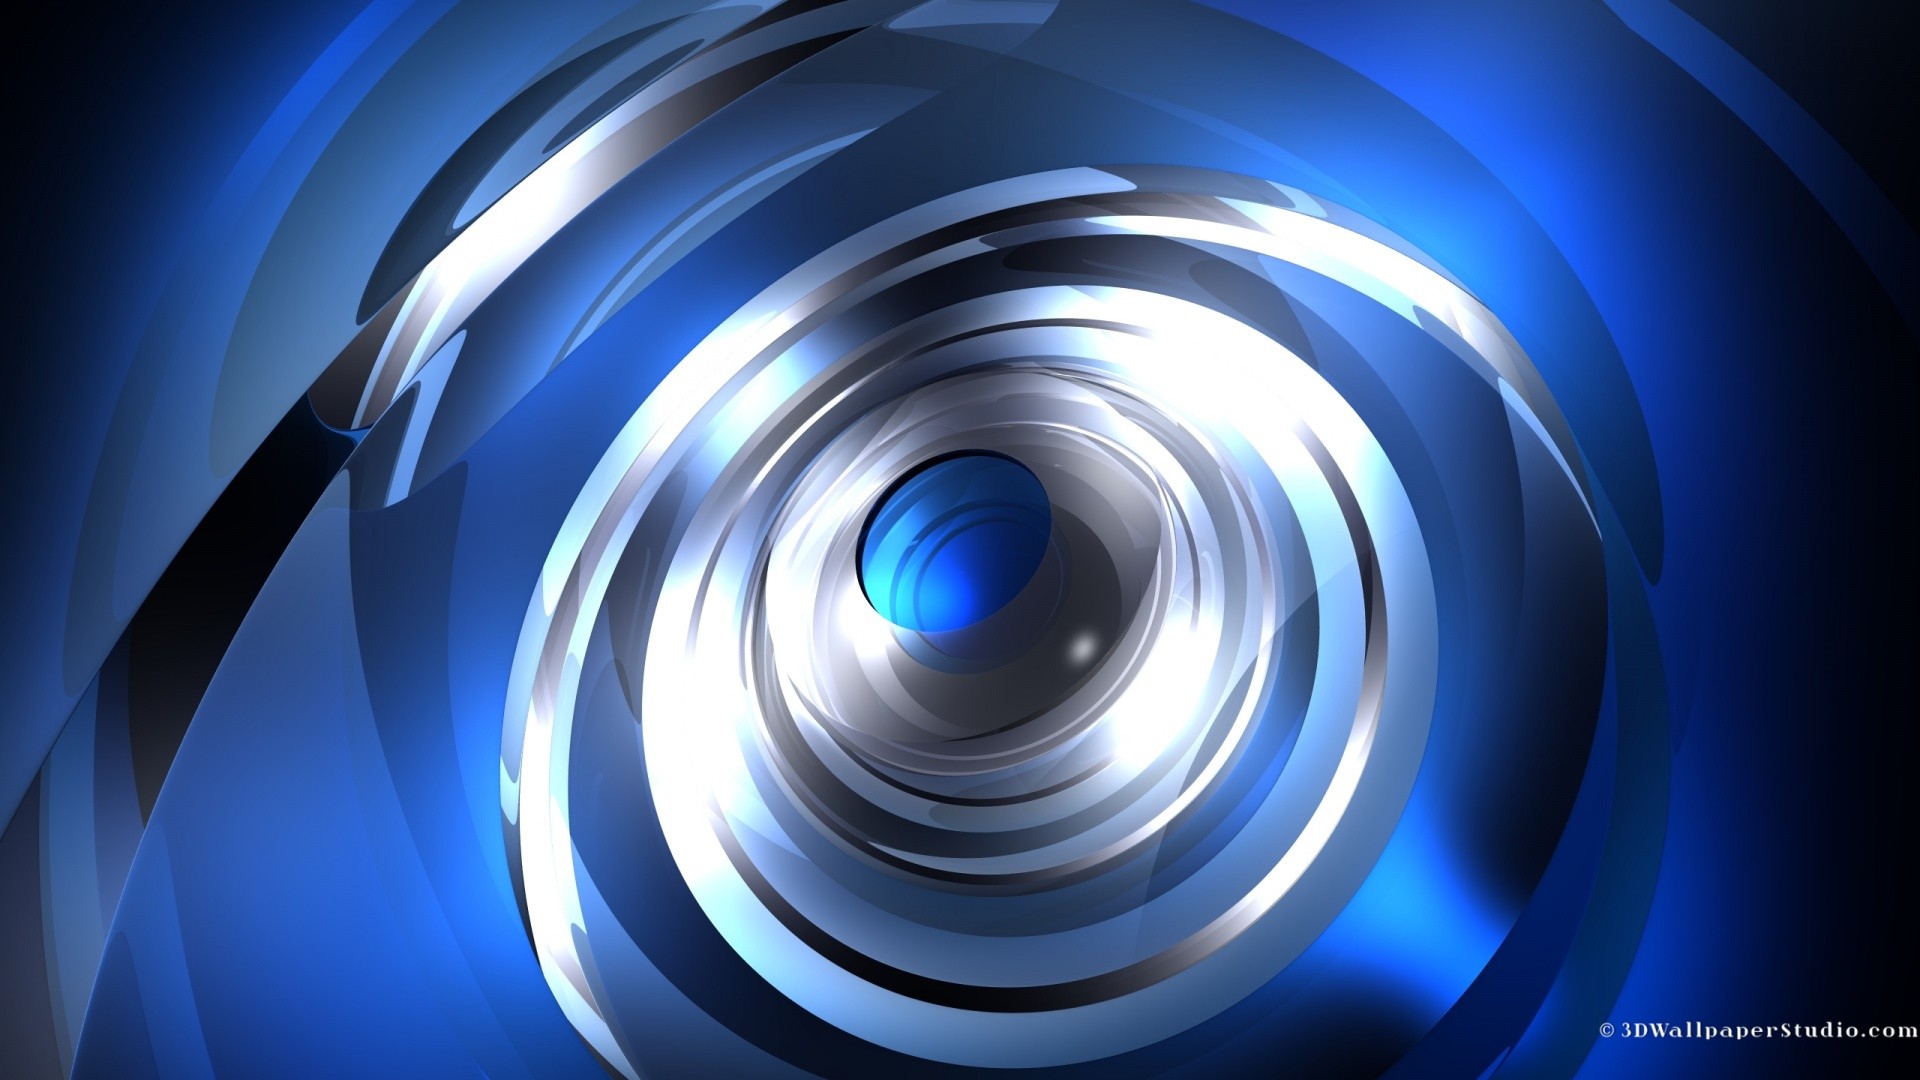 1920x1080 3D Wallpaper: Moving blue 3d abstract 1920 x 1080